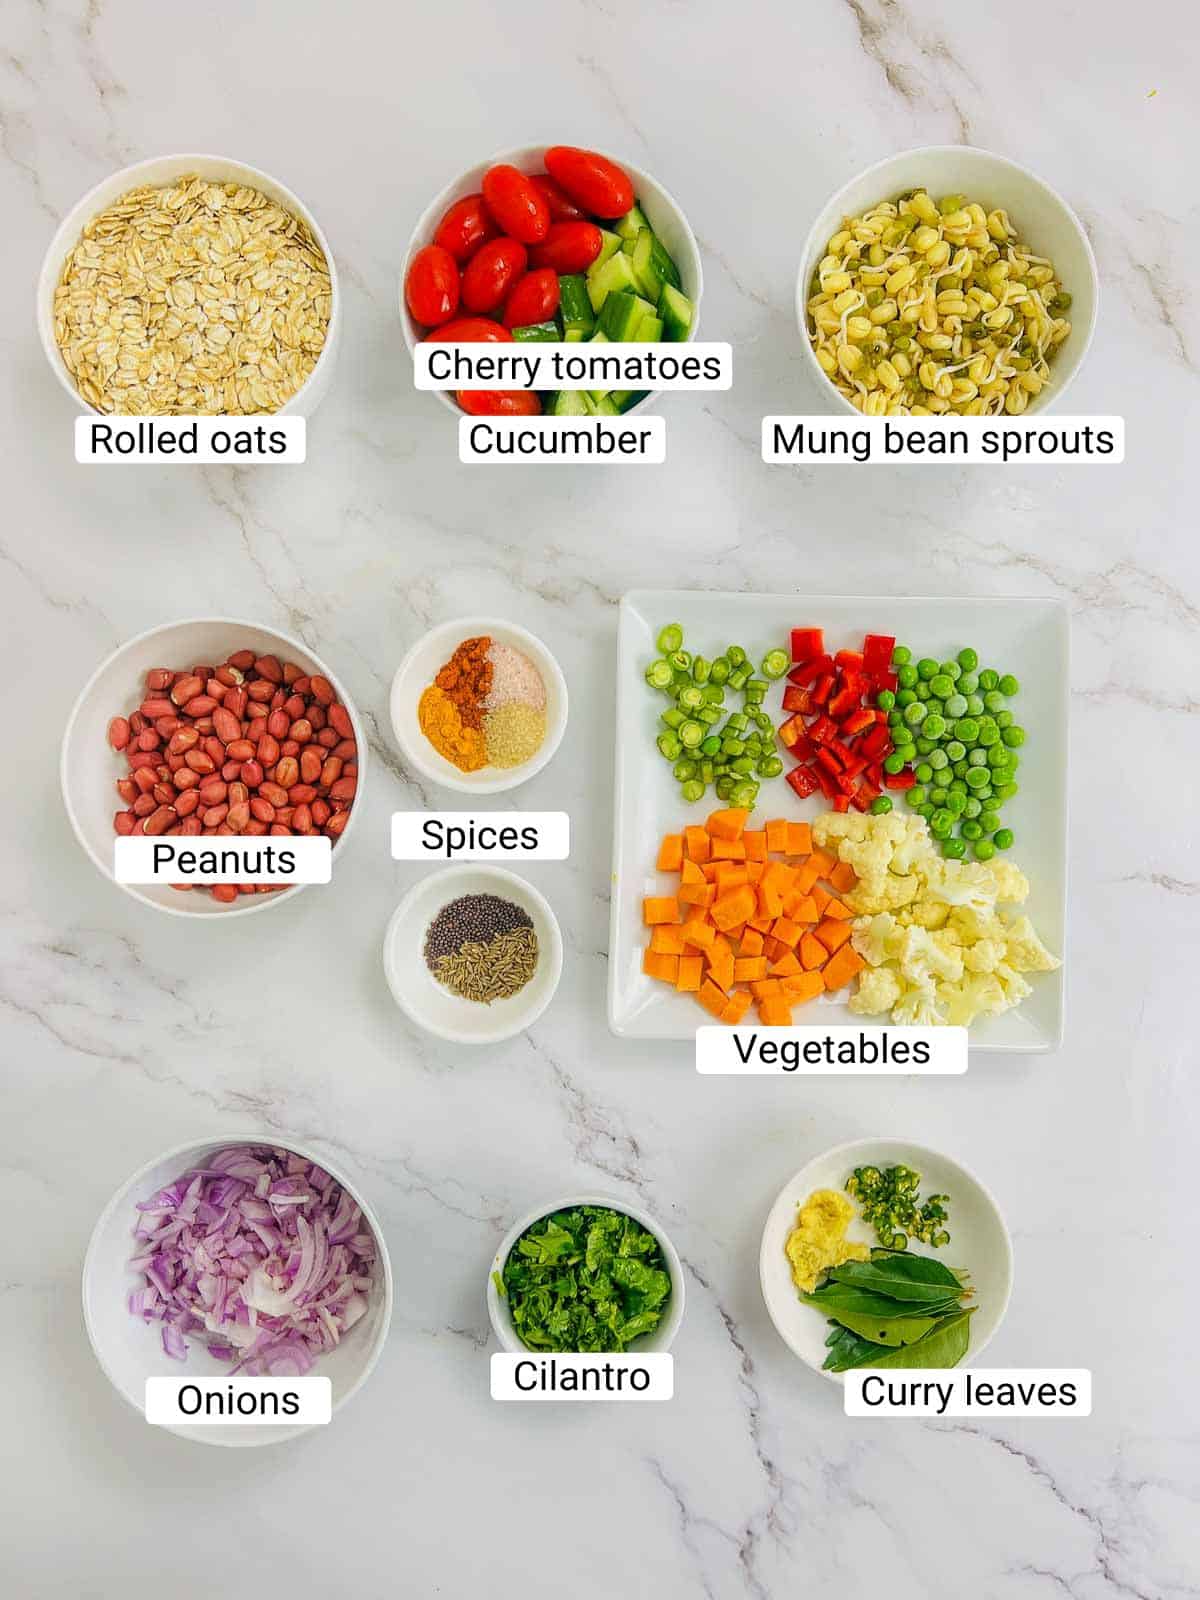 Ingredients to make oats upma breakfast bowl on a white surface.